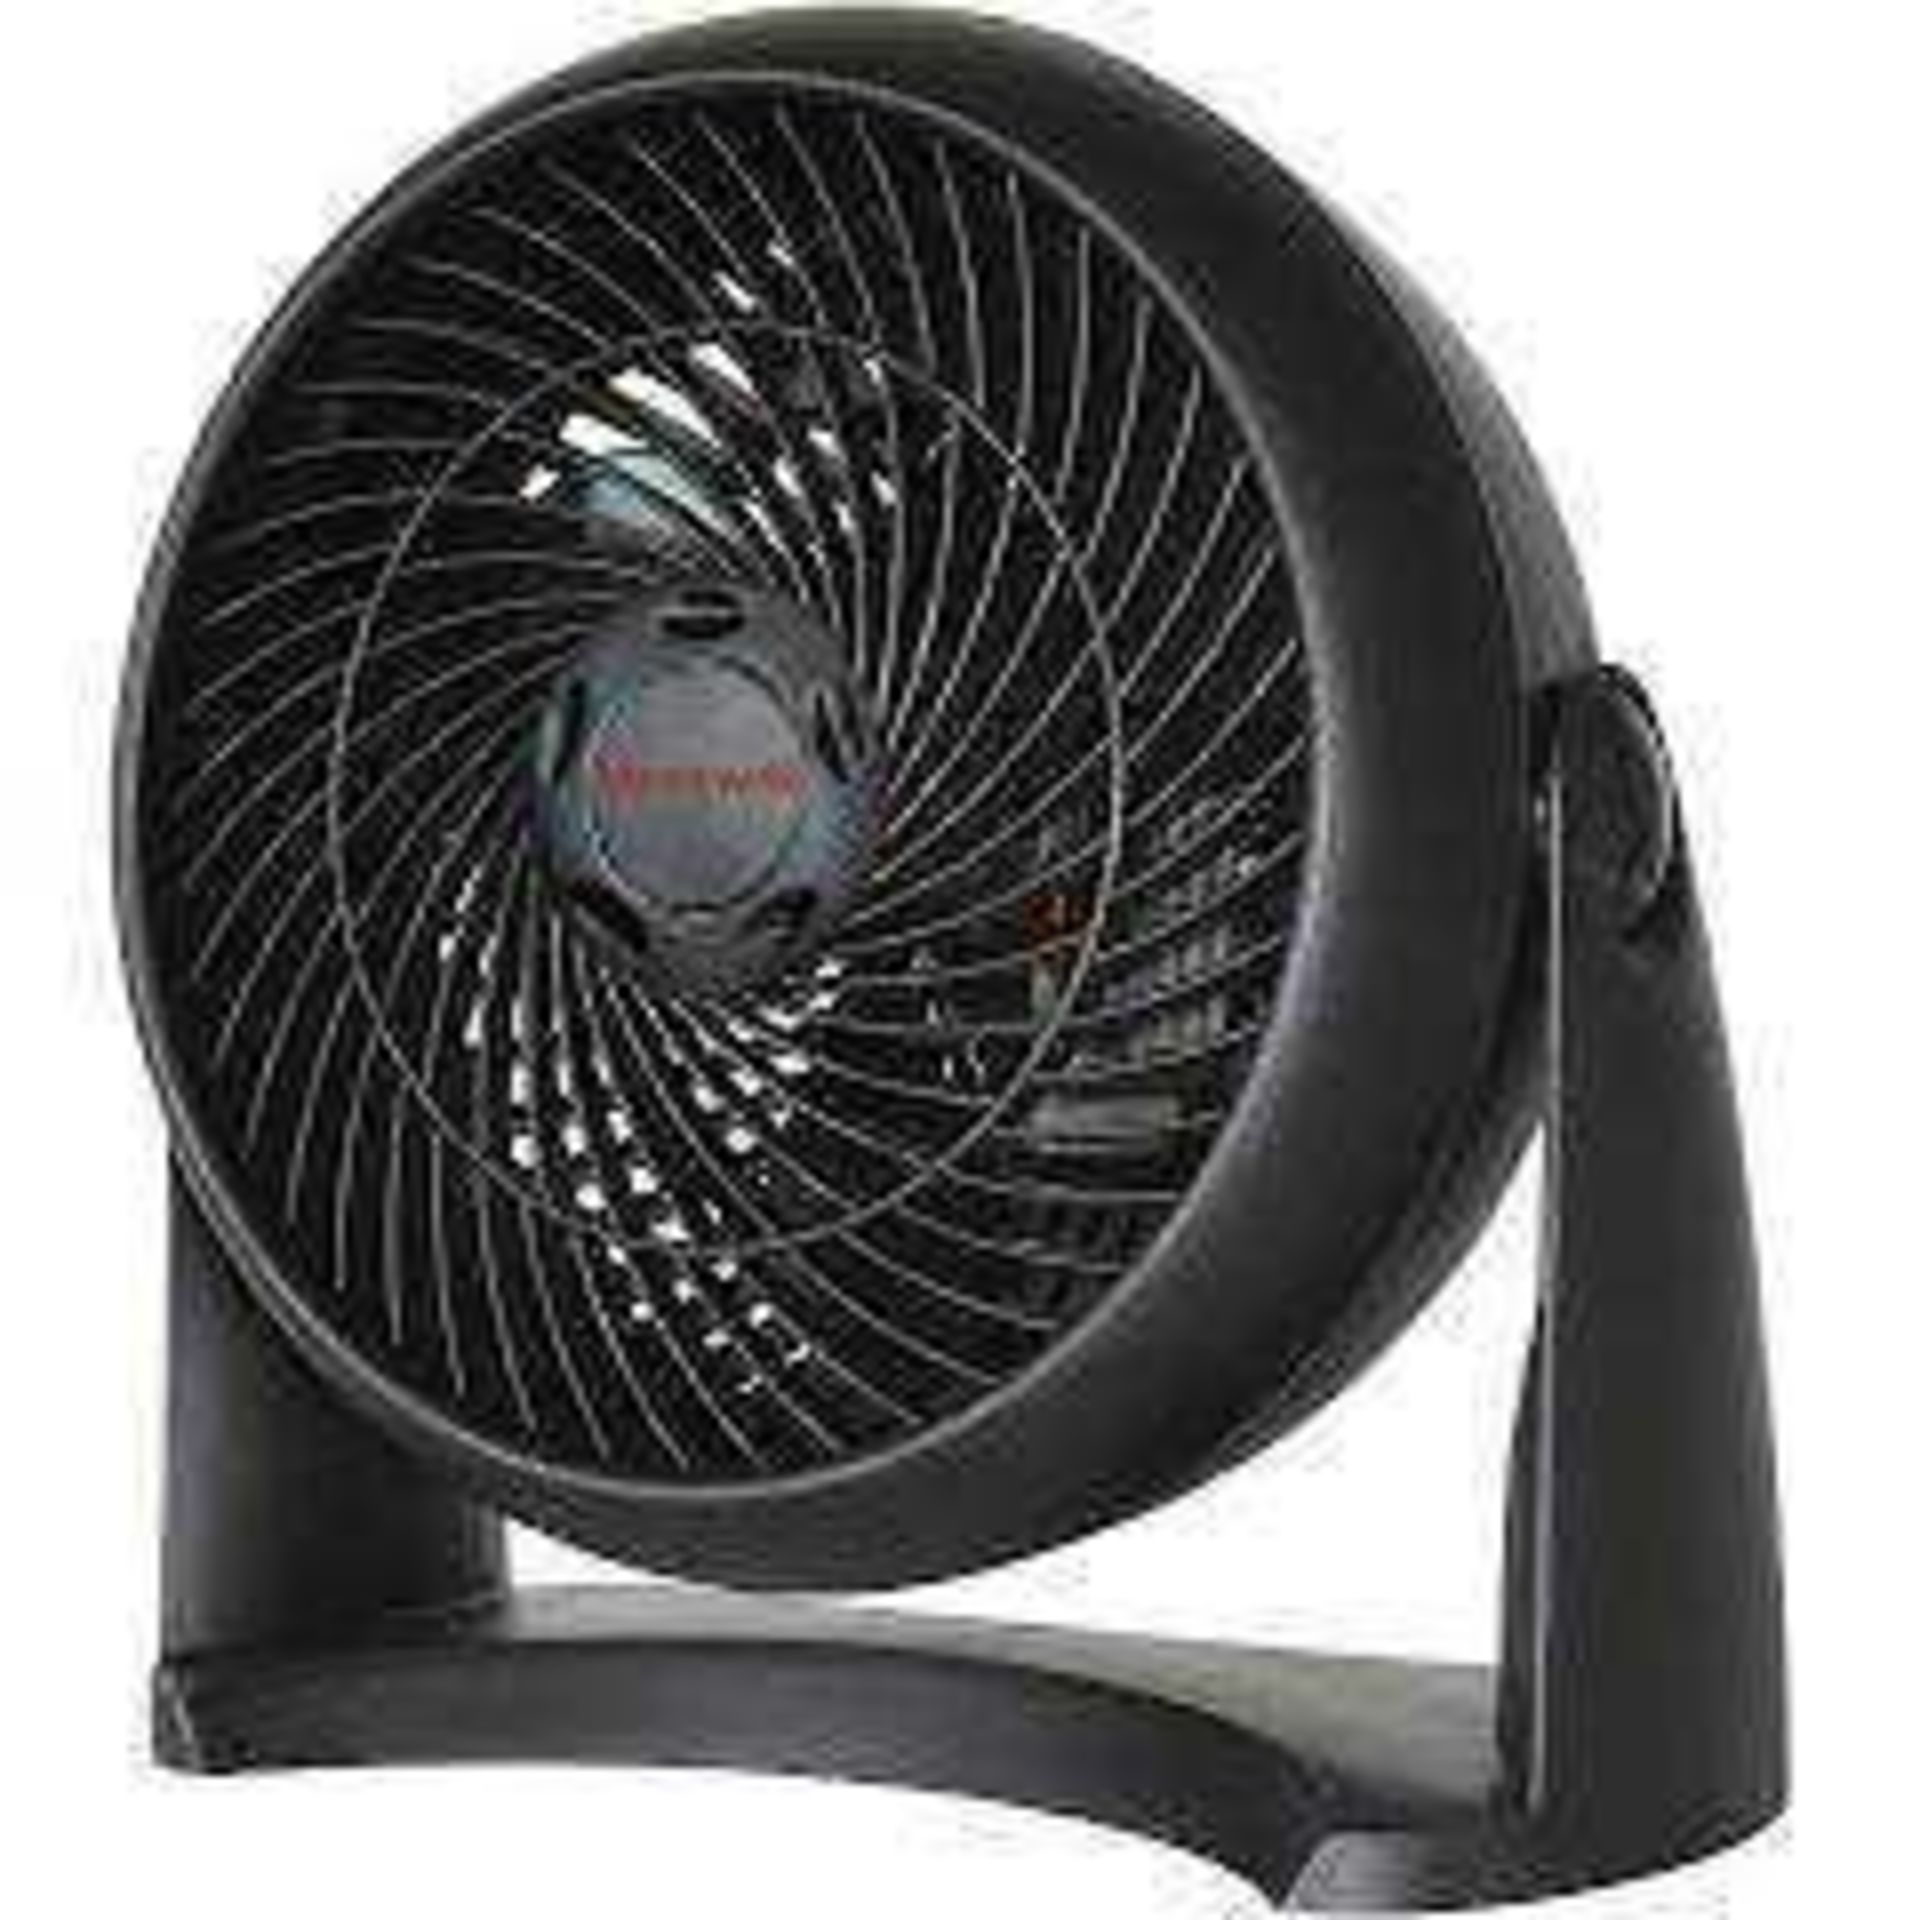 Combined RRP £130 Lot To Contain 2 Boxed Fans To Include Honeywell Desk Fan And Clarke Air 18Inch Pe